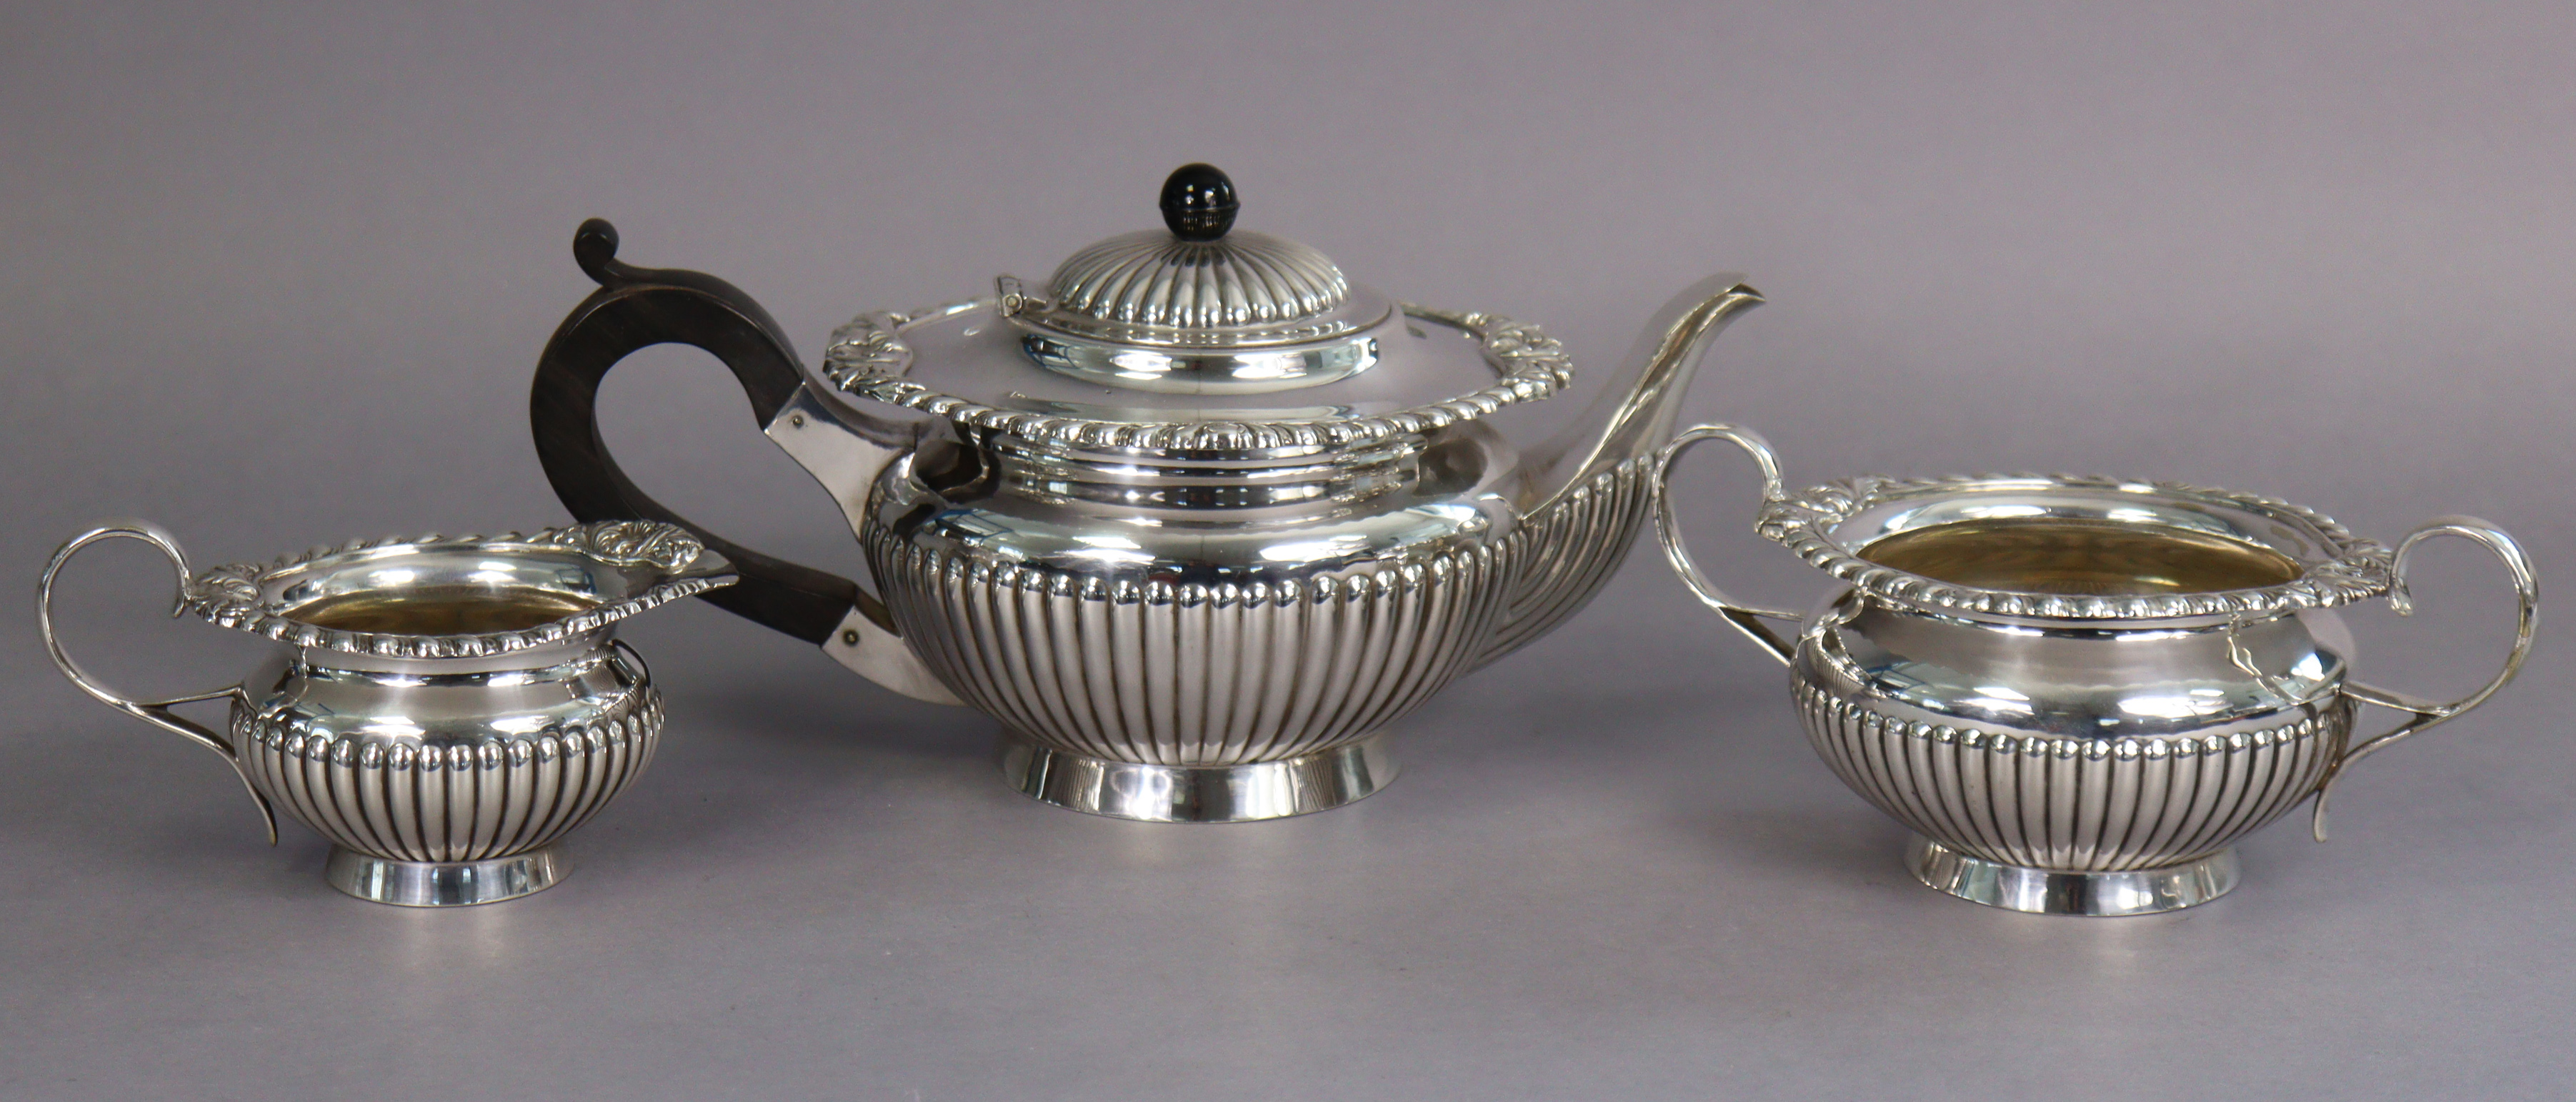 A silver-plated regency-style three-piece tea service of squat round semi-fluted form, with